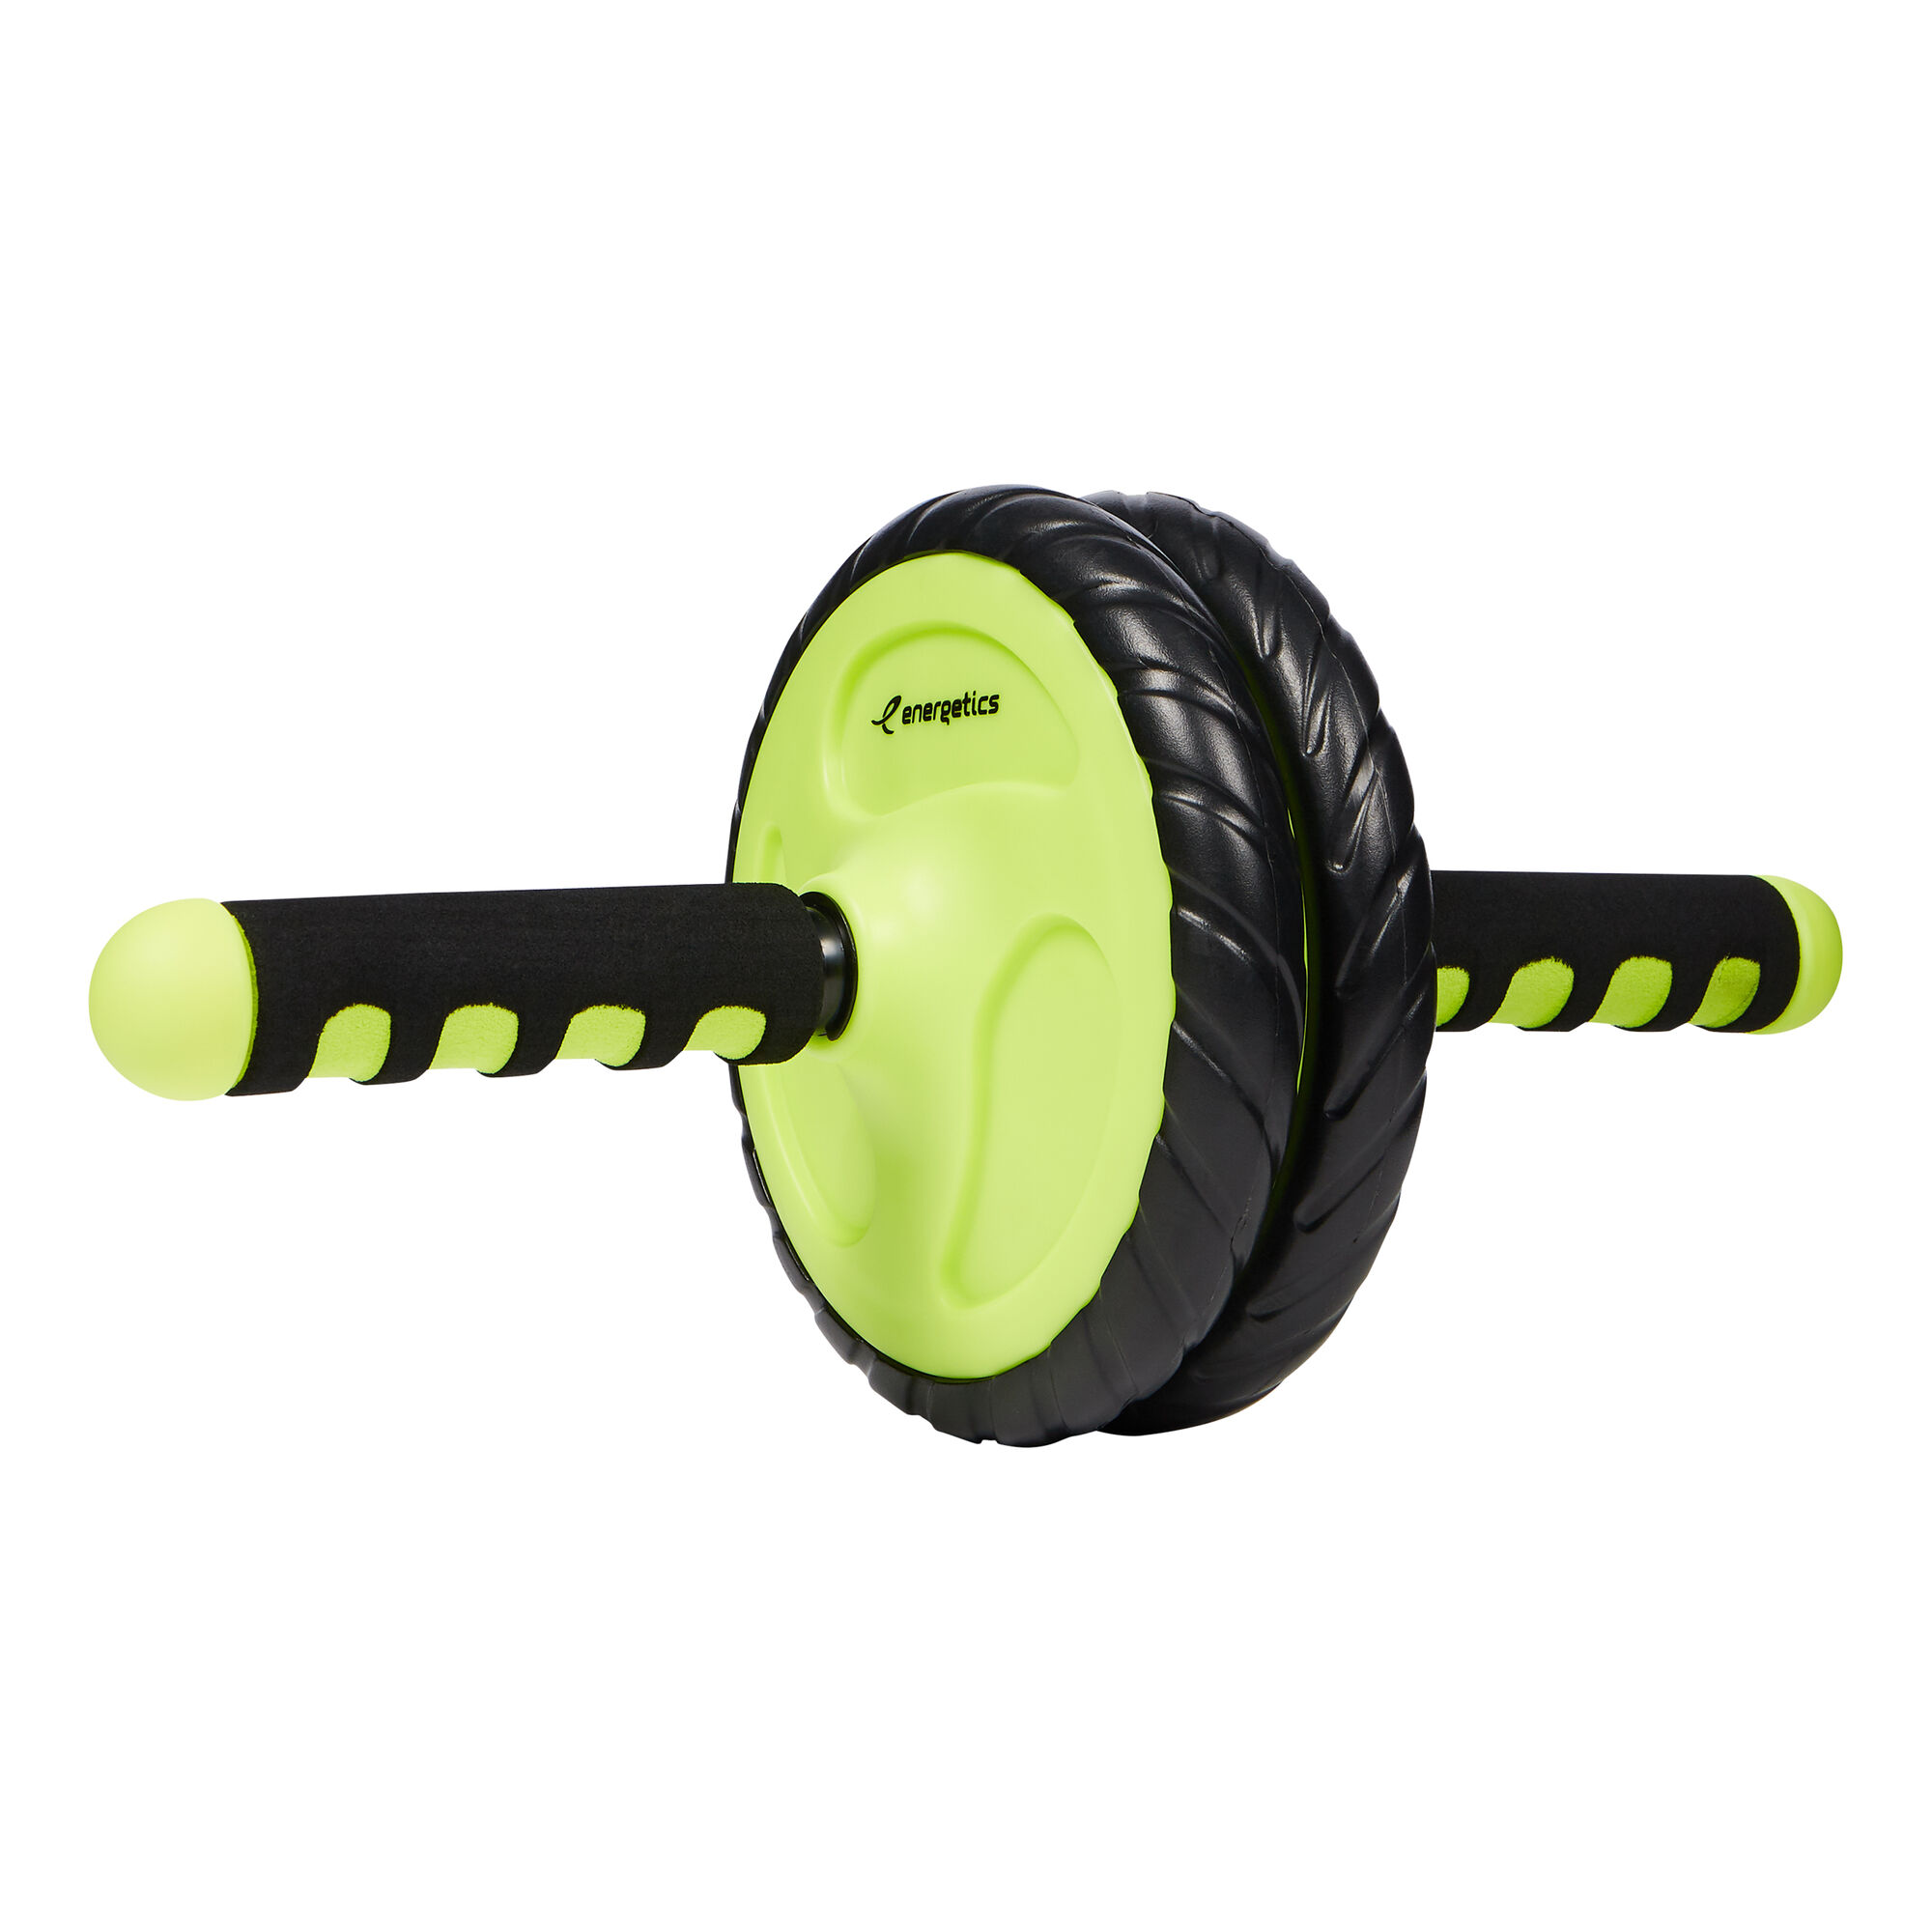 Energetics AB COM Buy Pro Tennis Bauchtrainer Point Roller online | Device Black, Yellow Training